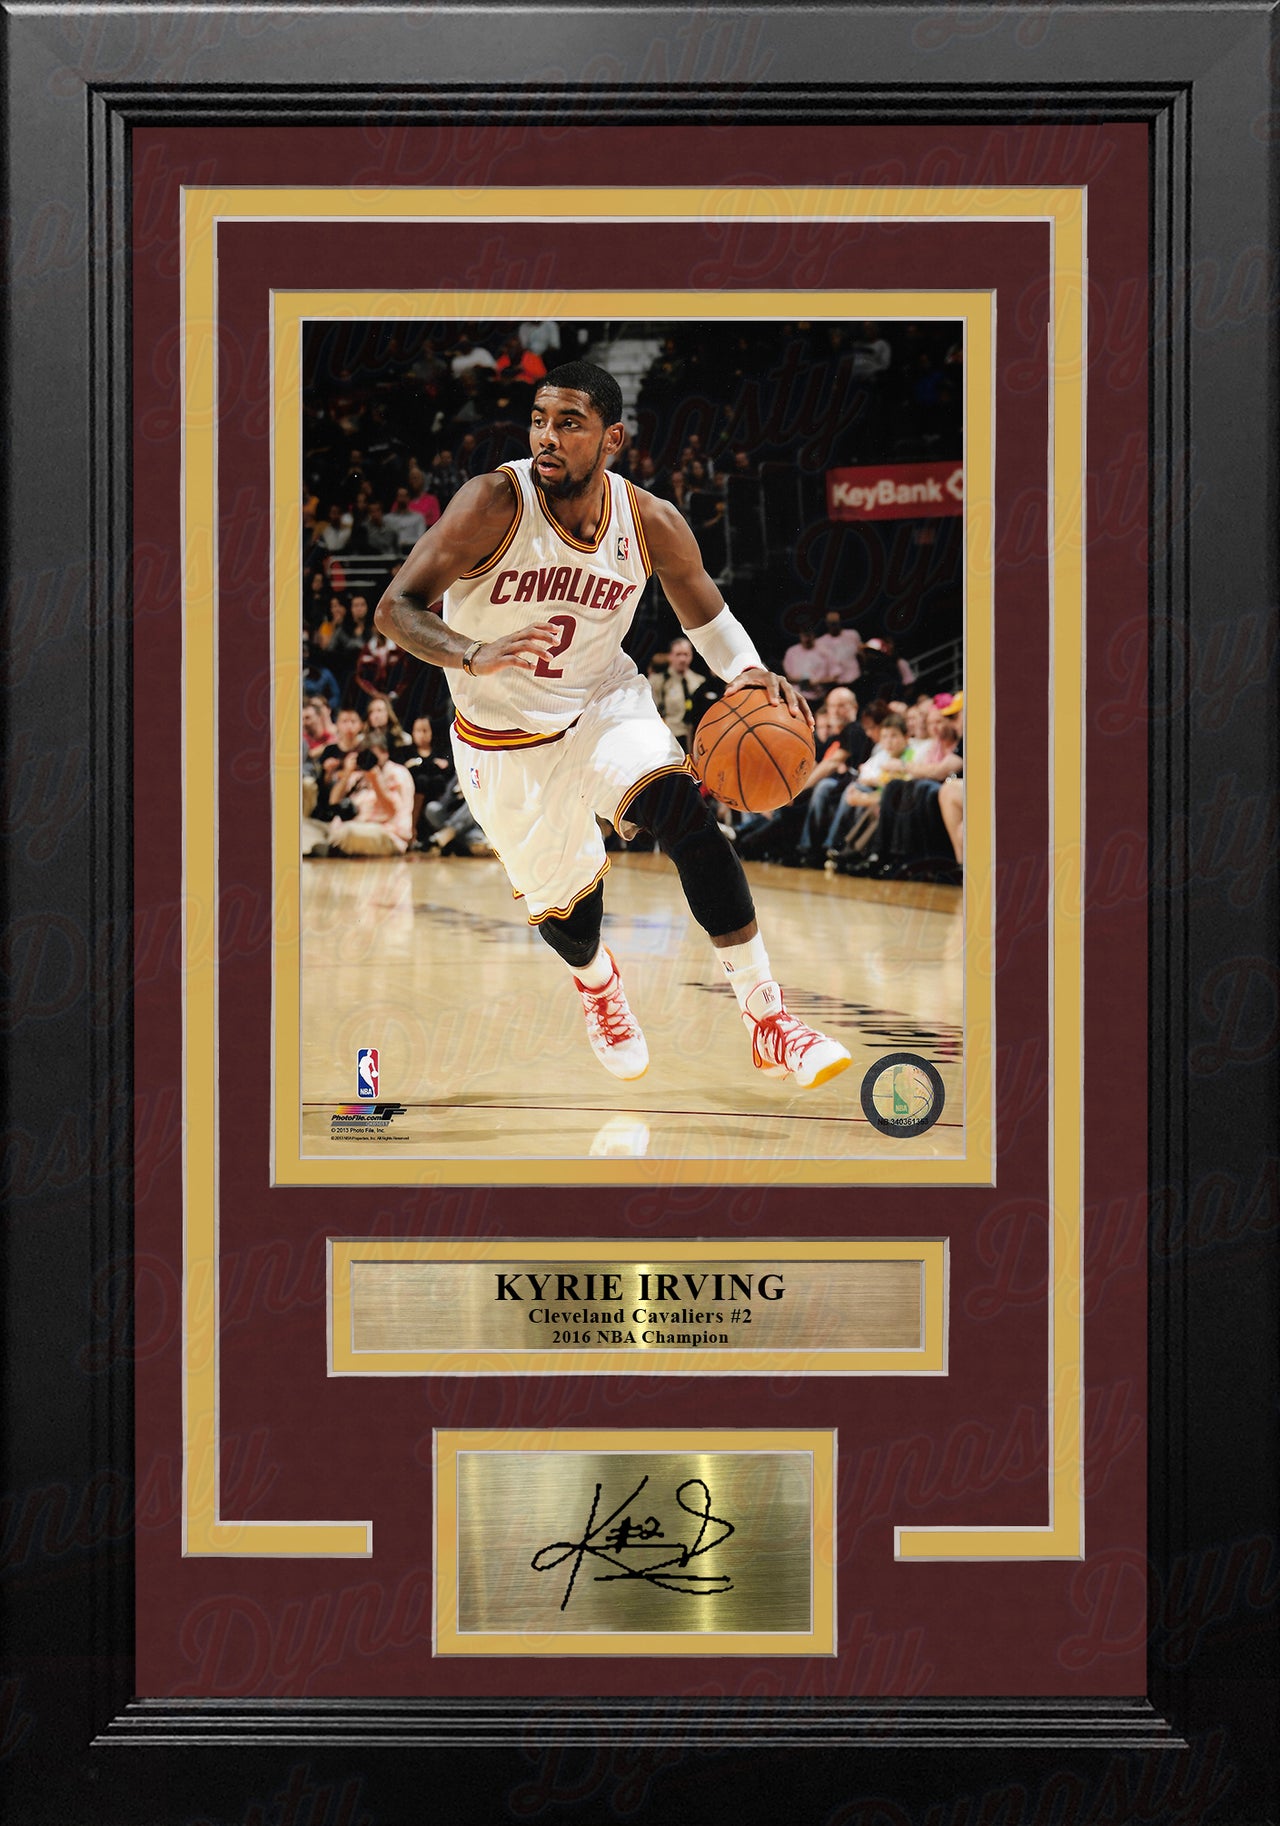 Kyrie Irving in Action Cleveland Cavaliers 8" x 10" Framed Basketball Photo with Engraved Autograph - Dynasty Sports & Framing 